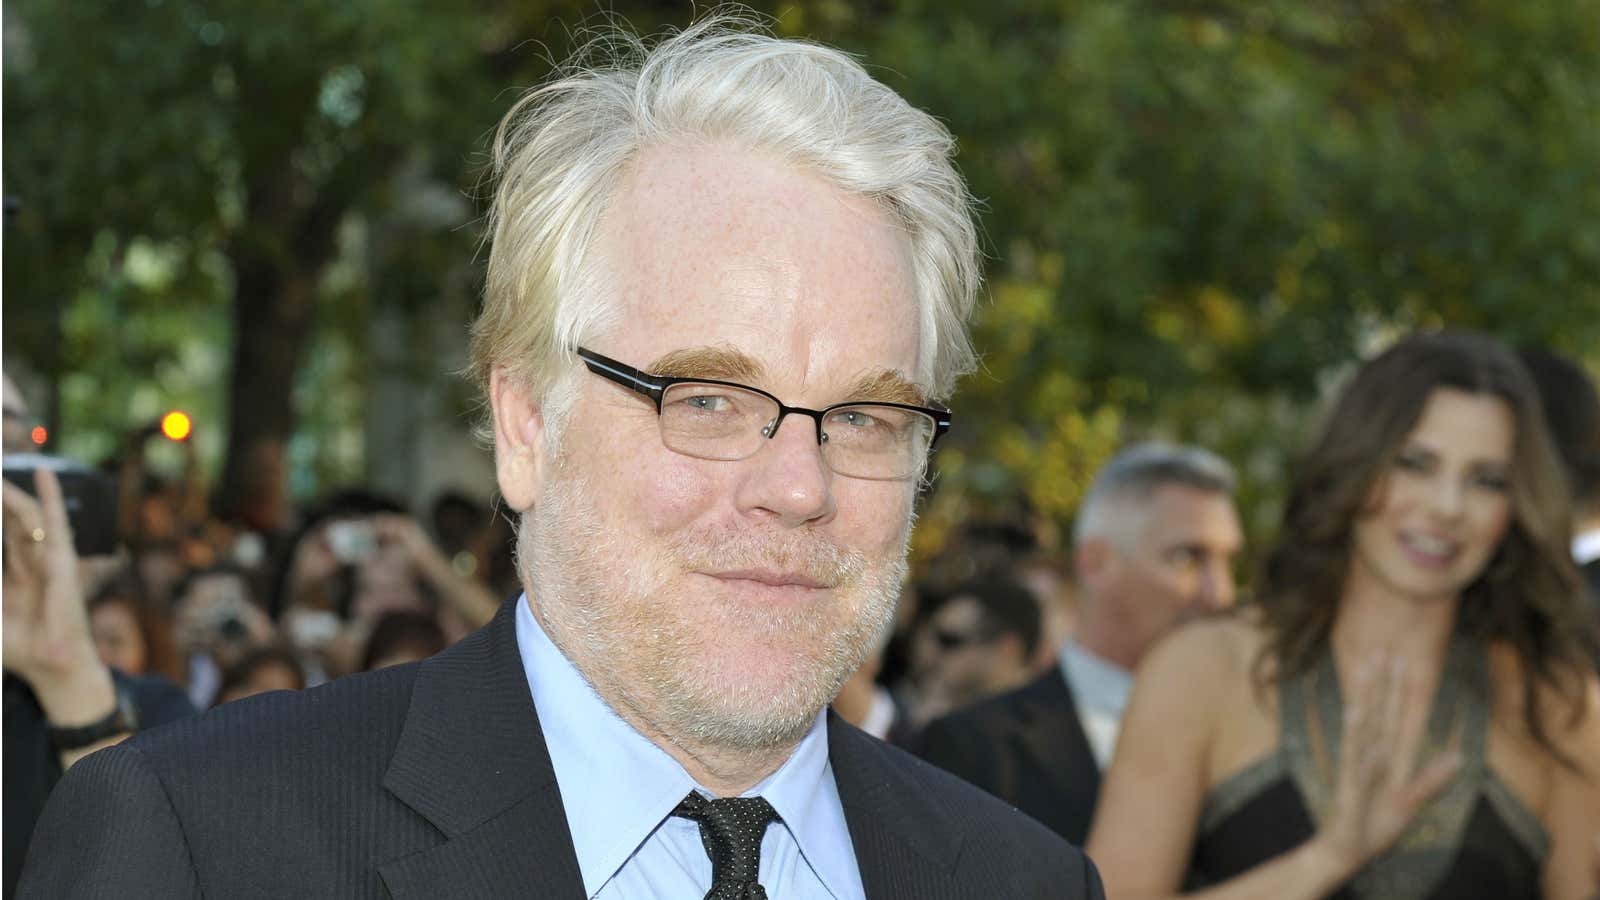 Actor Philip Seymour Hoffman died of heroin overdose bringing the issue into the national spotlight.